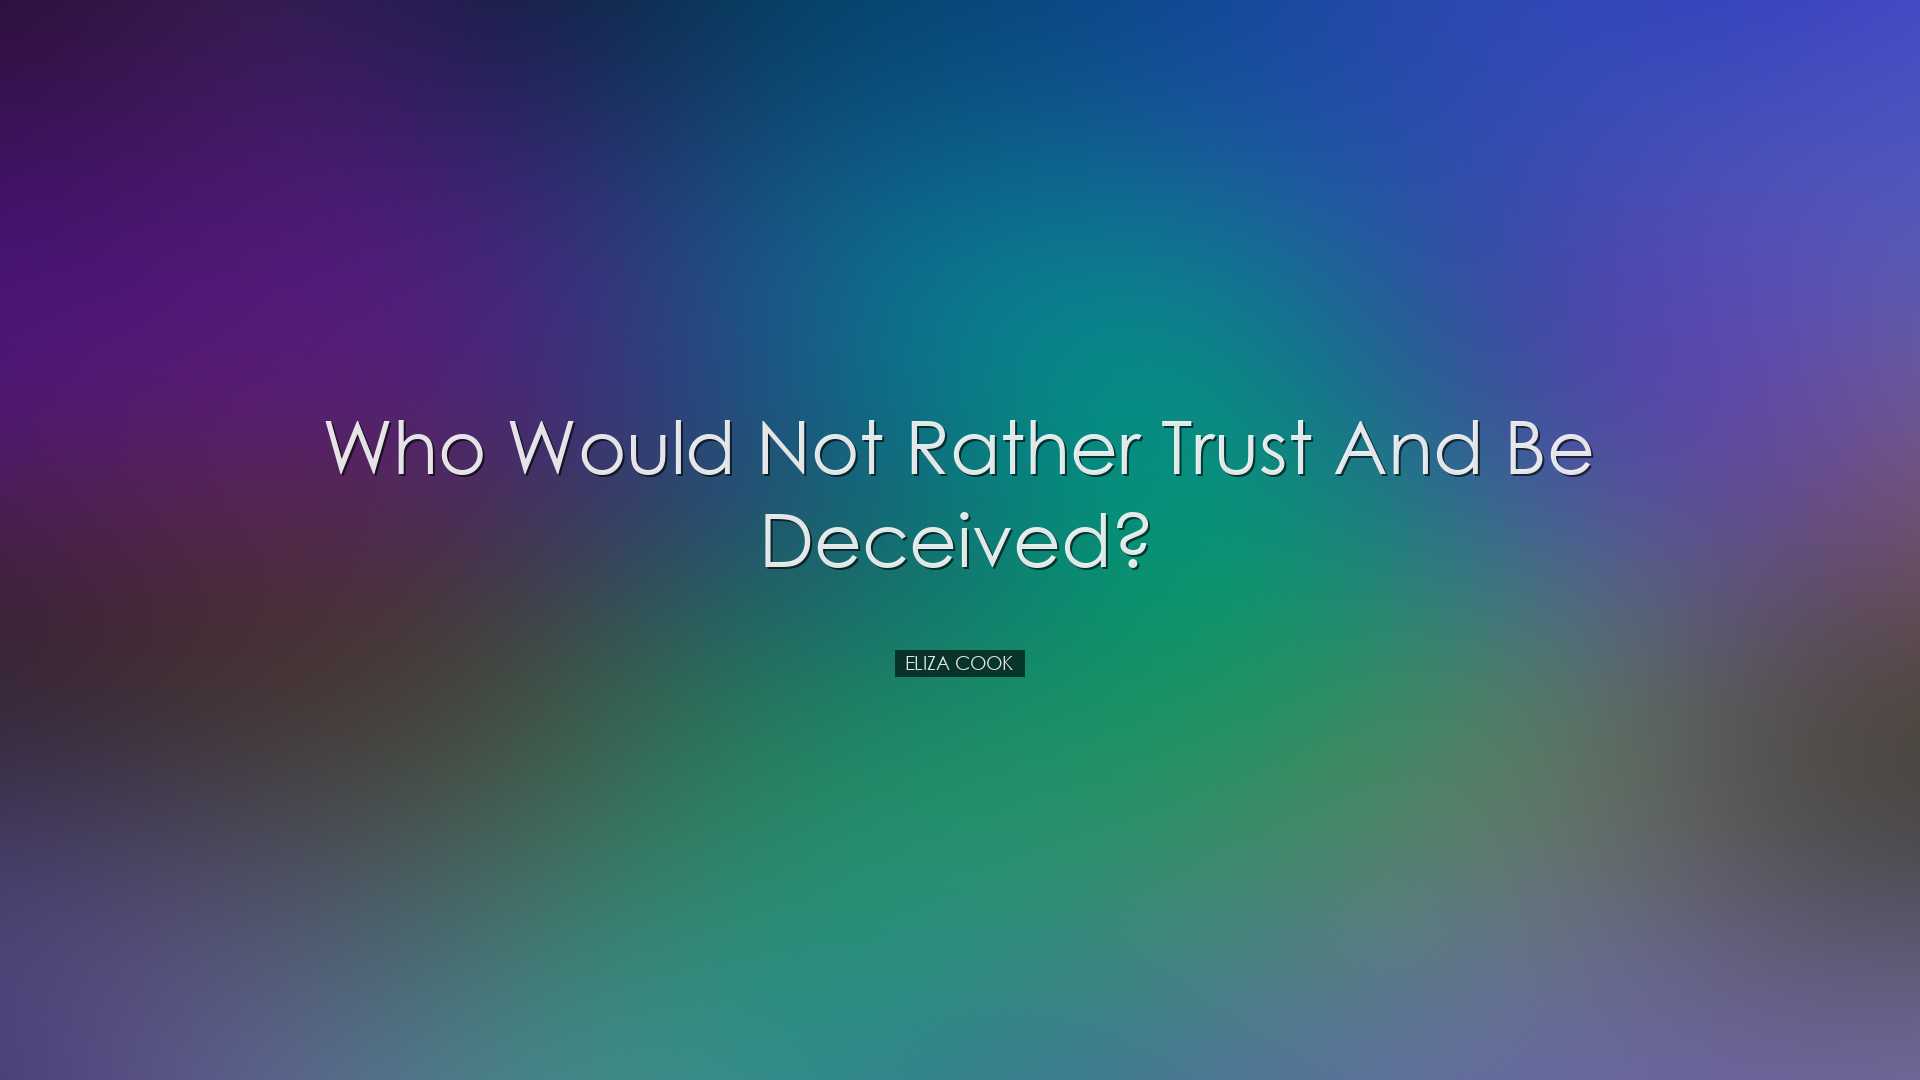 Who would not rather trust and be deceived? - Eliza Cook